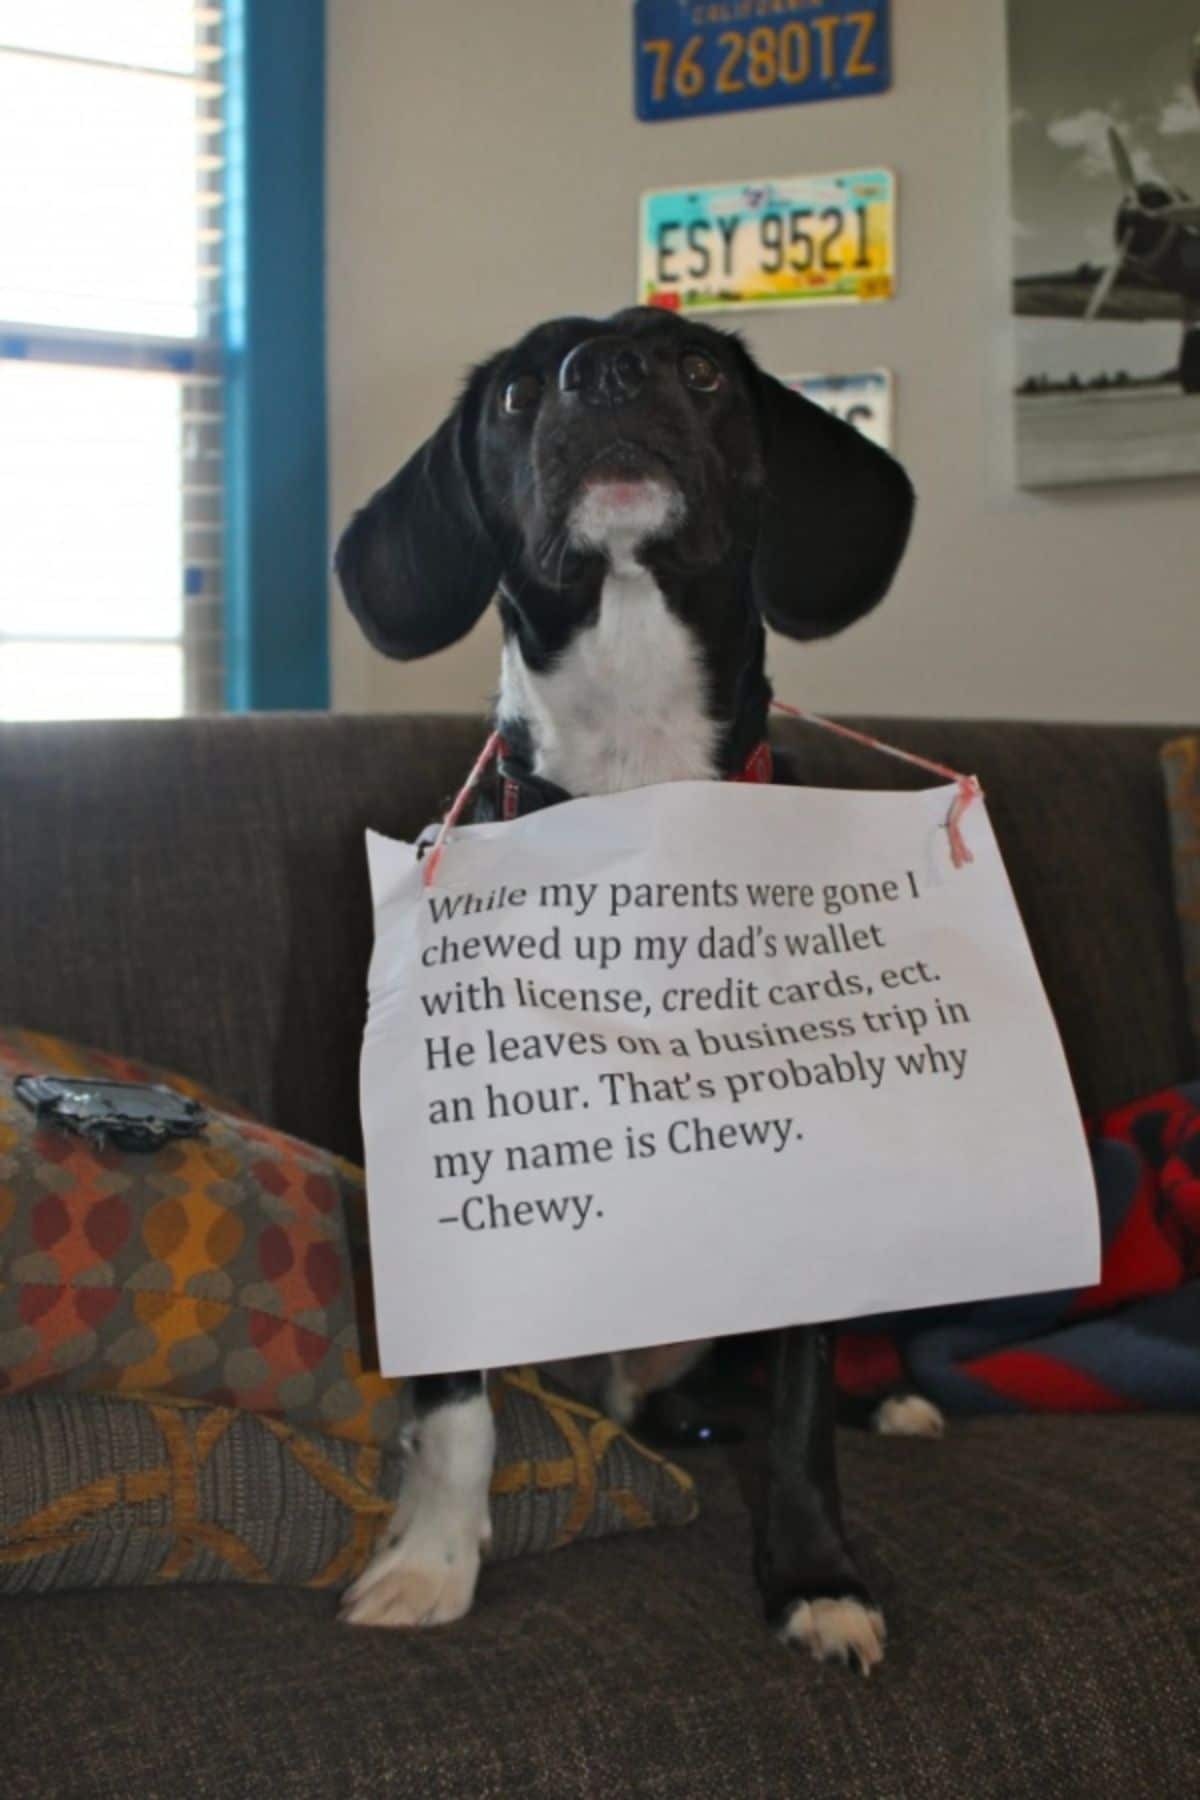 black and white dog with a sign saying he chewed up the dad's wallet